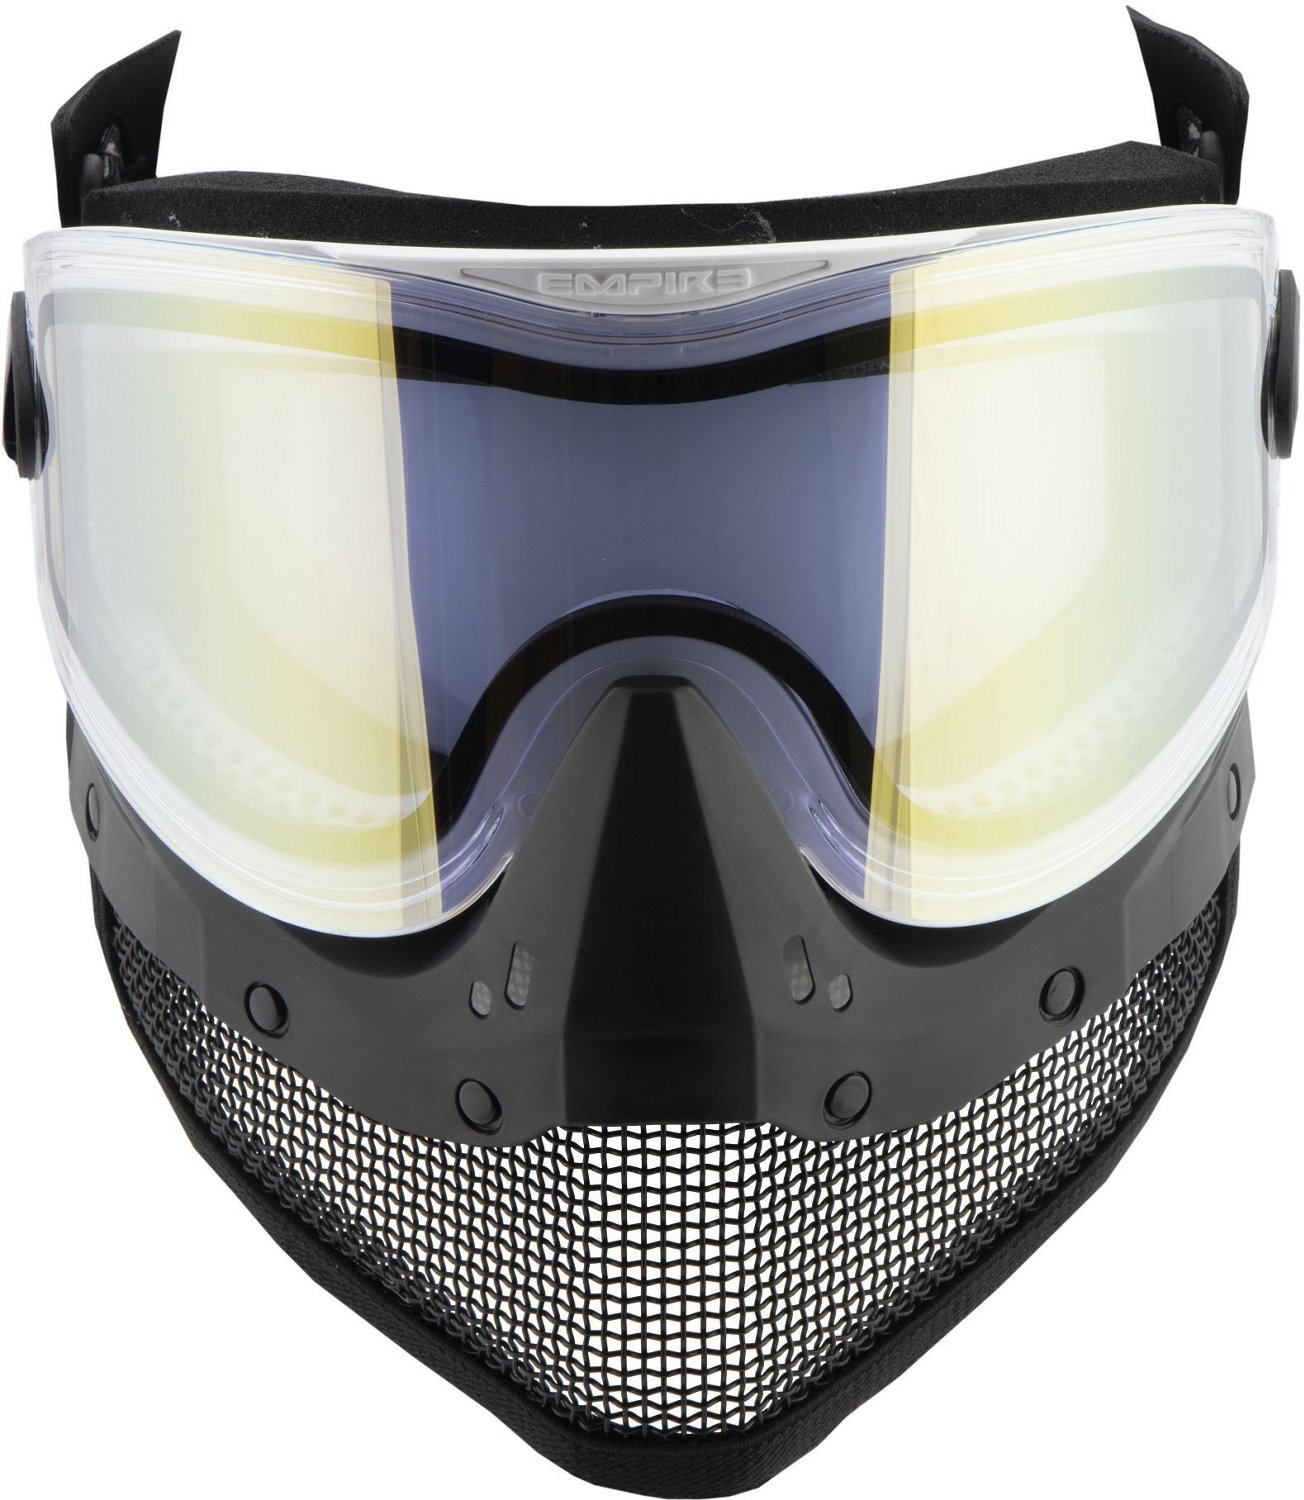 Tippmann Empire E-mesh Airsoft Goggle Black Thermal Smoke C3 for sale online 